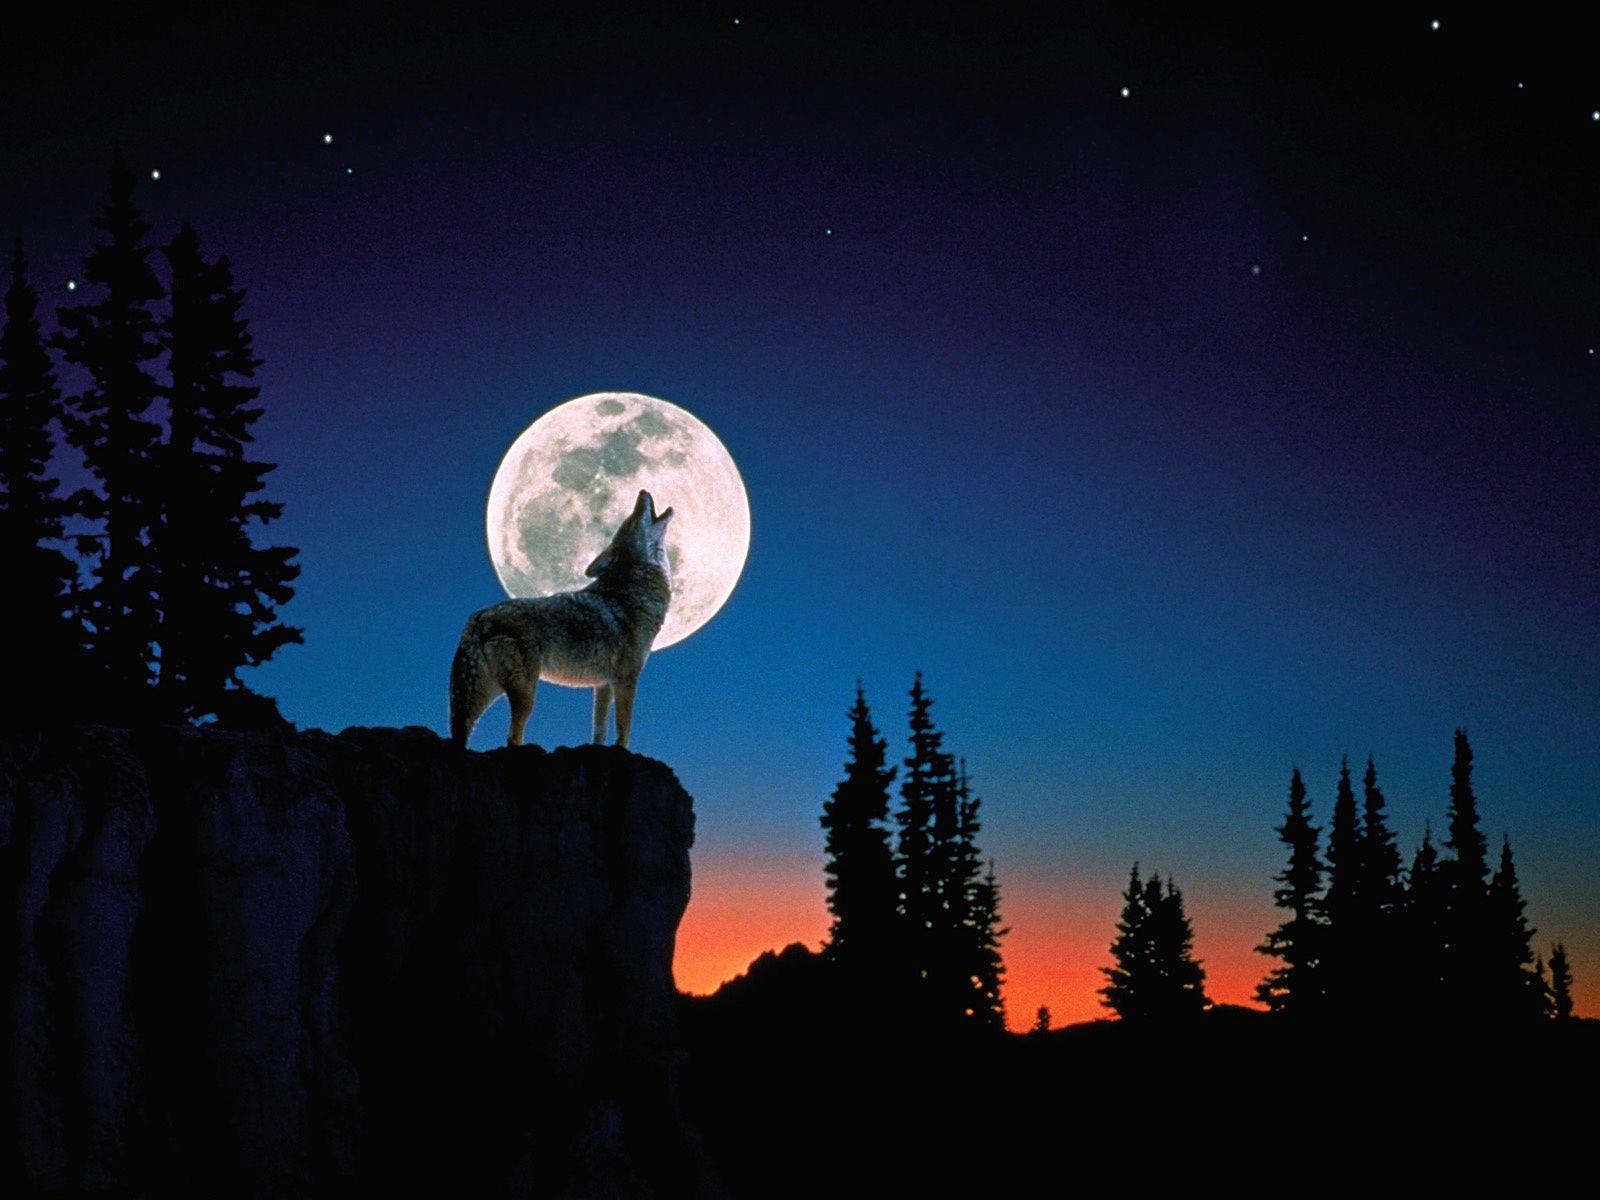 Wallpaper For > Black And White Wolf Howling At The Moon Wallpaper